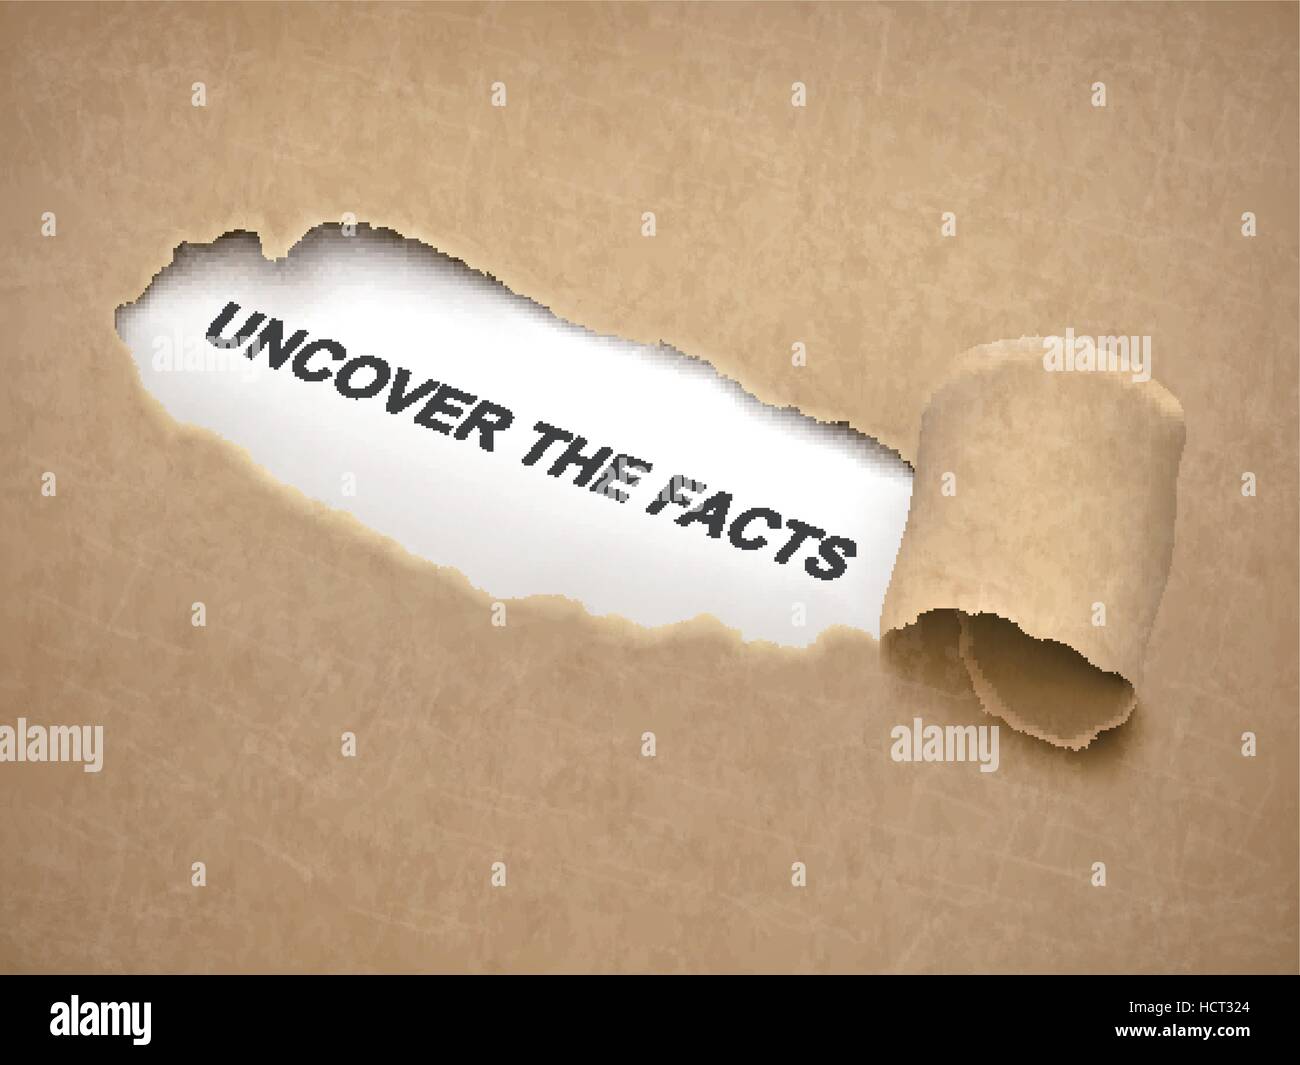 uncover the facts words behind brown torn paper Stock Vector